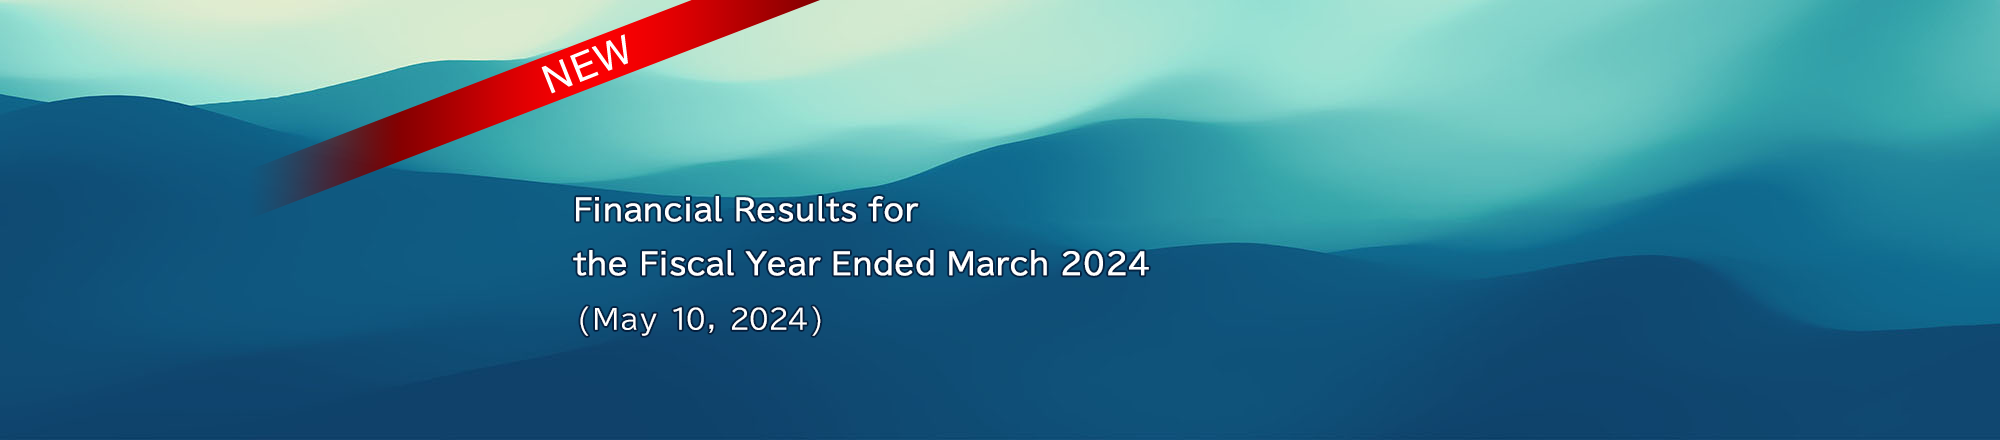 Financial Results for the Third Quarter of the Fiscal Year Ending March 2024 (February 2, 2024)